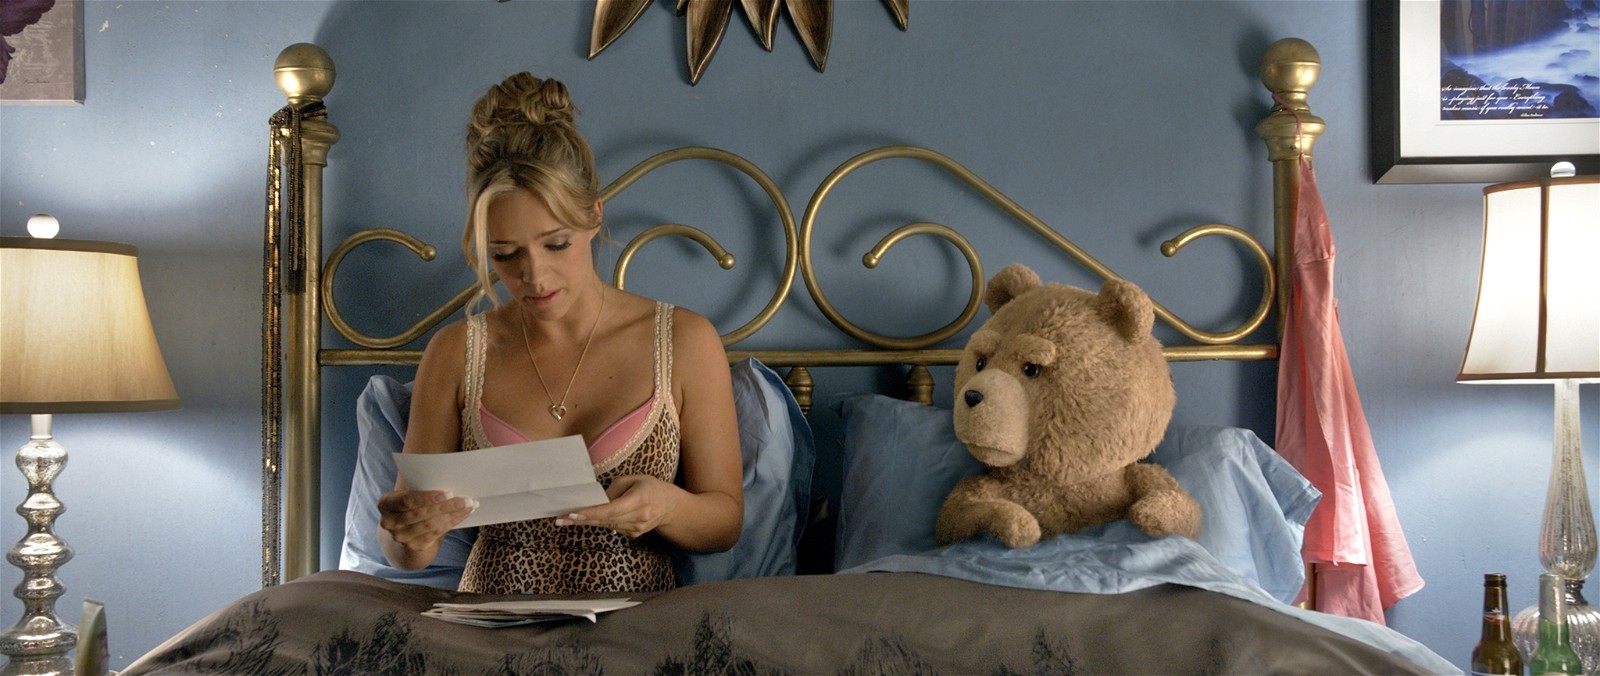 A still from Ted 2 (2015)